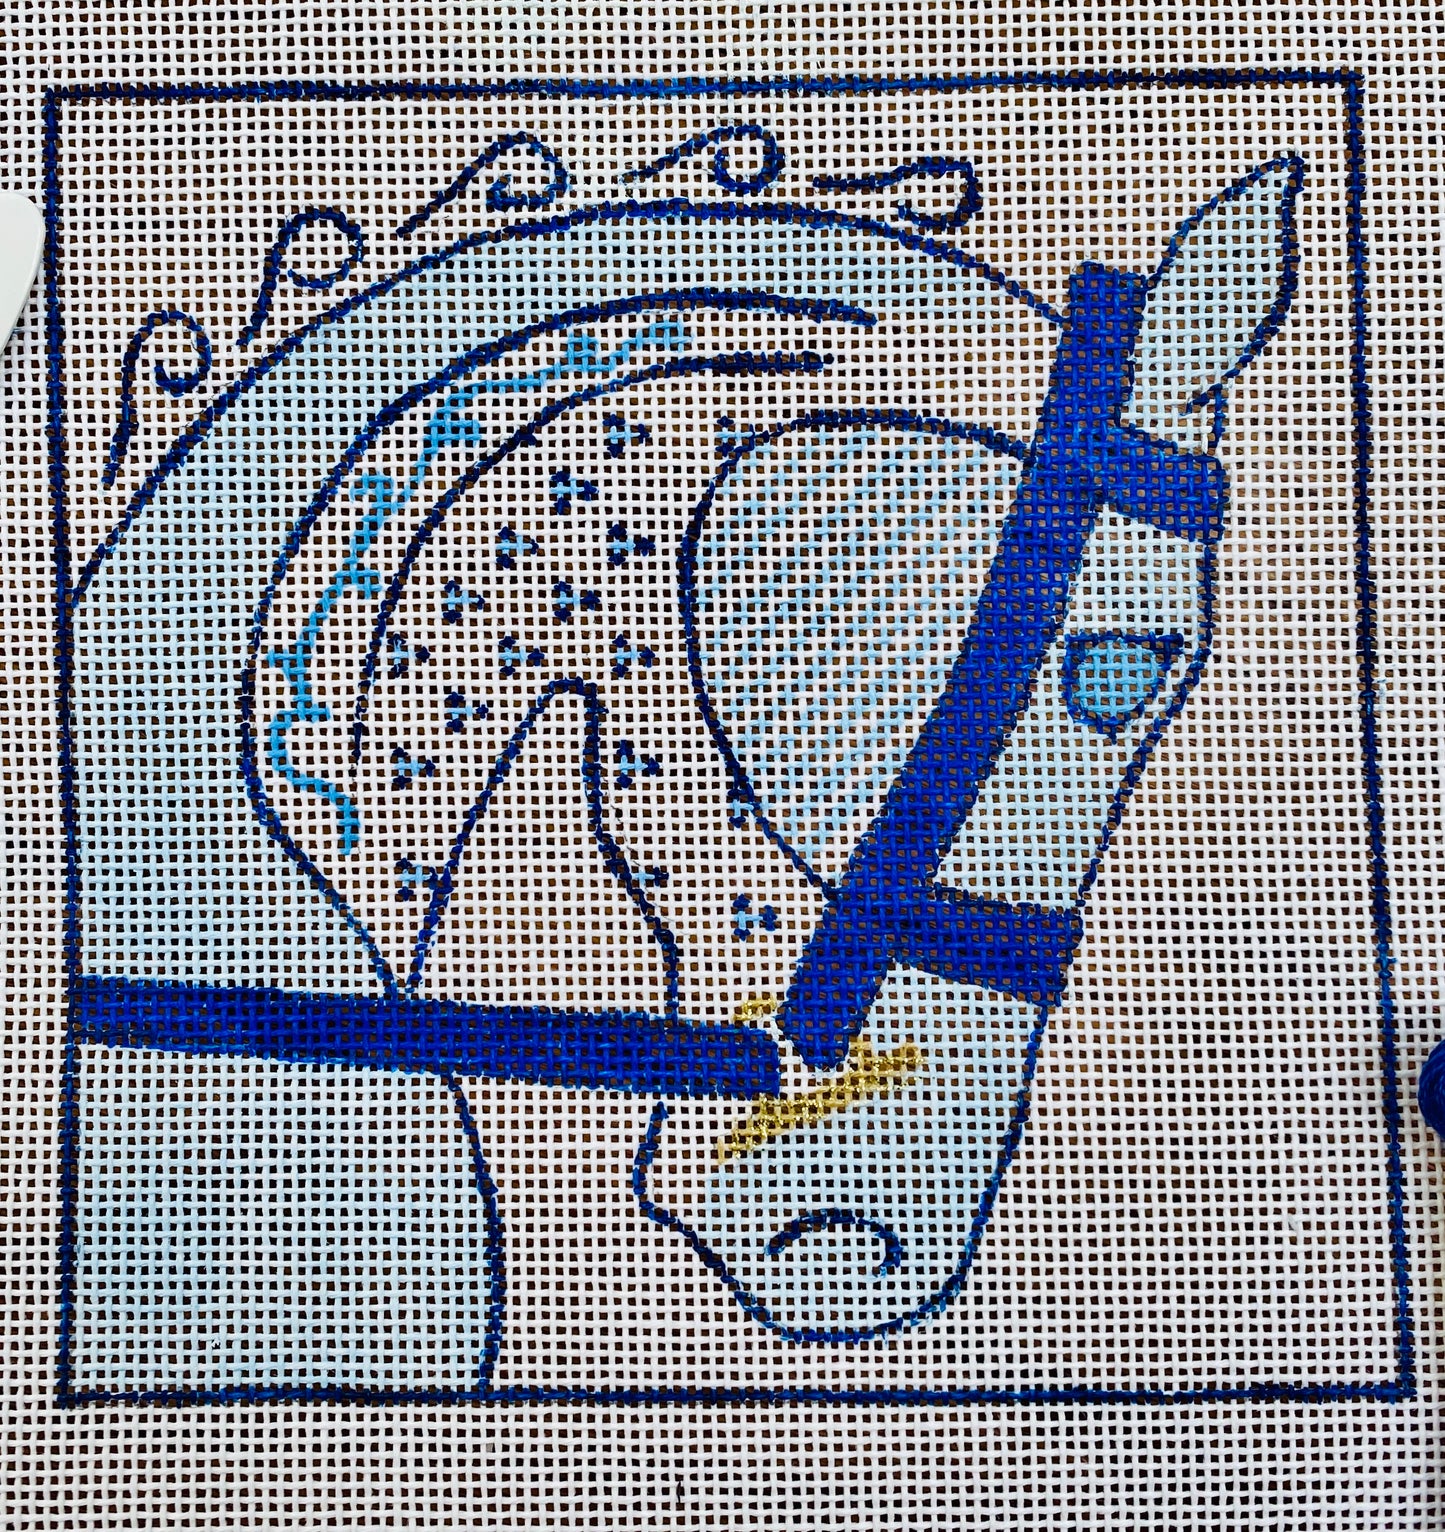 "PORCELAIN HORSE HEAD IN BLUE", 5.25" square on 18 mesh